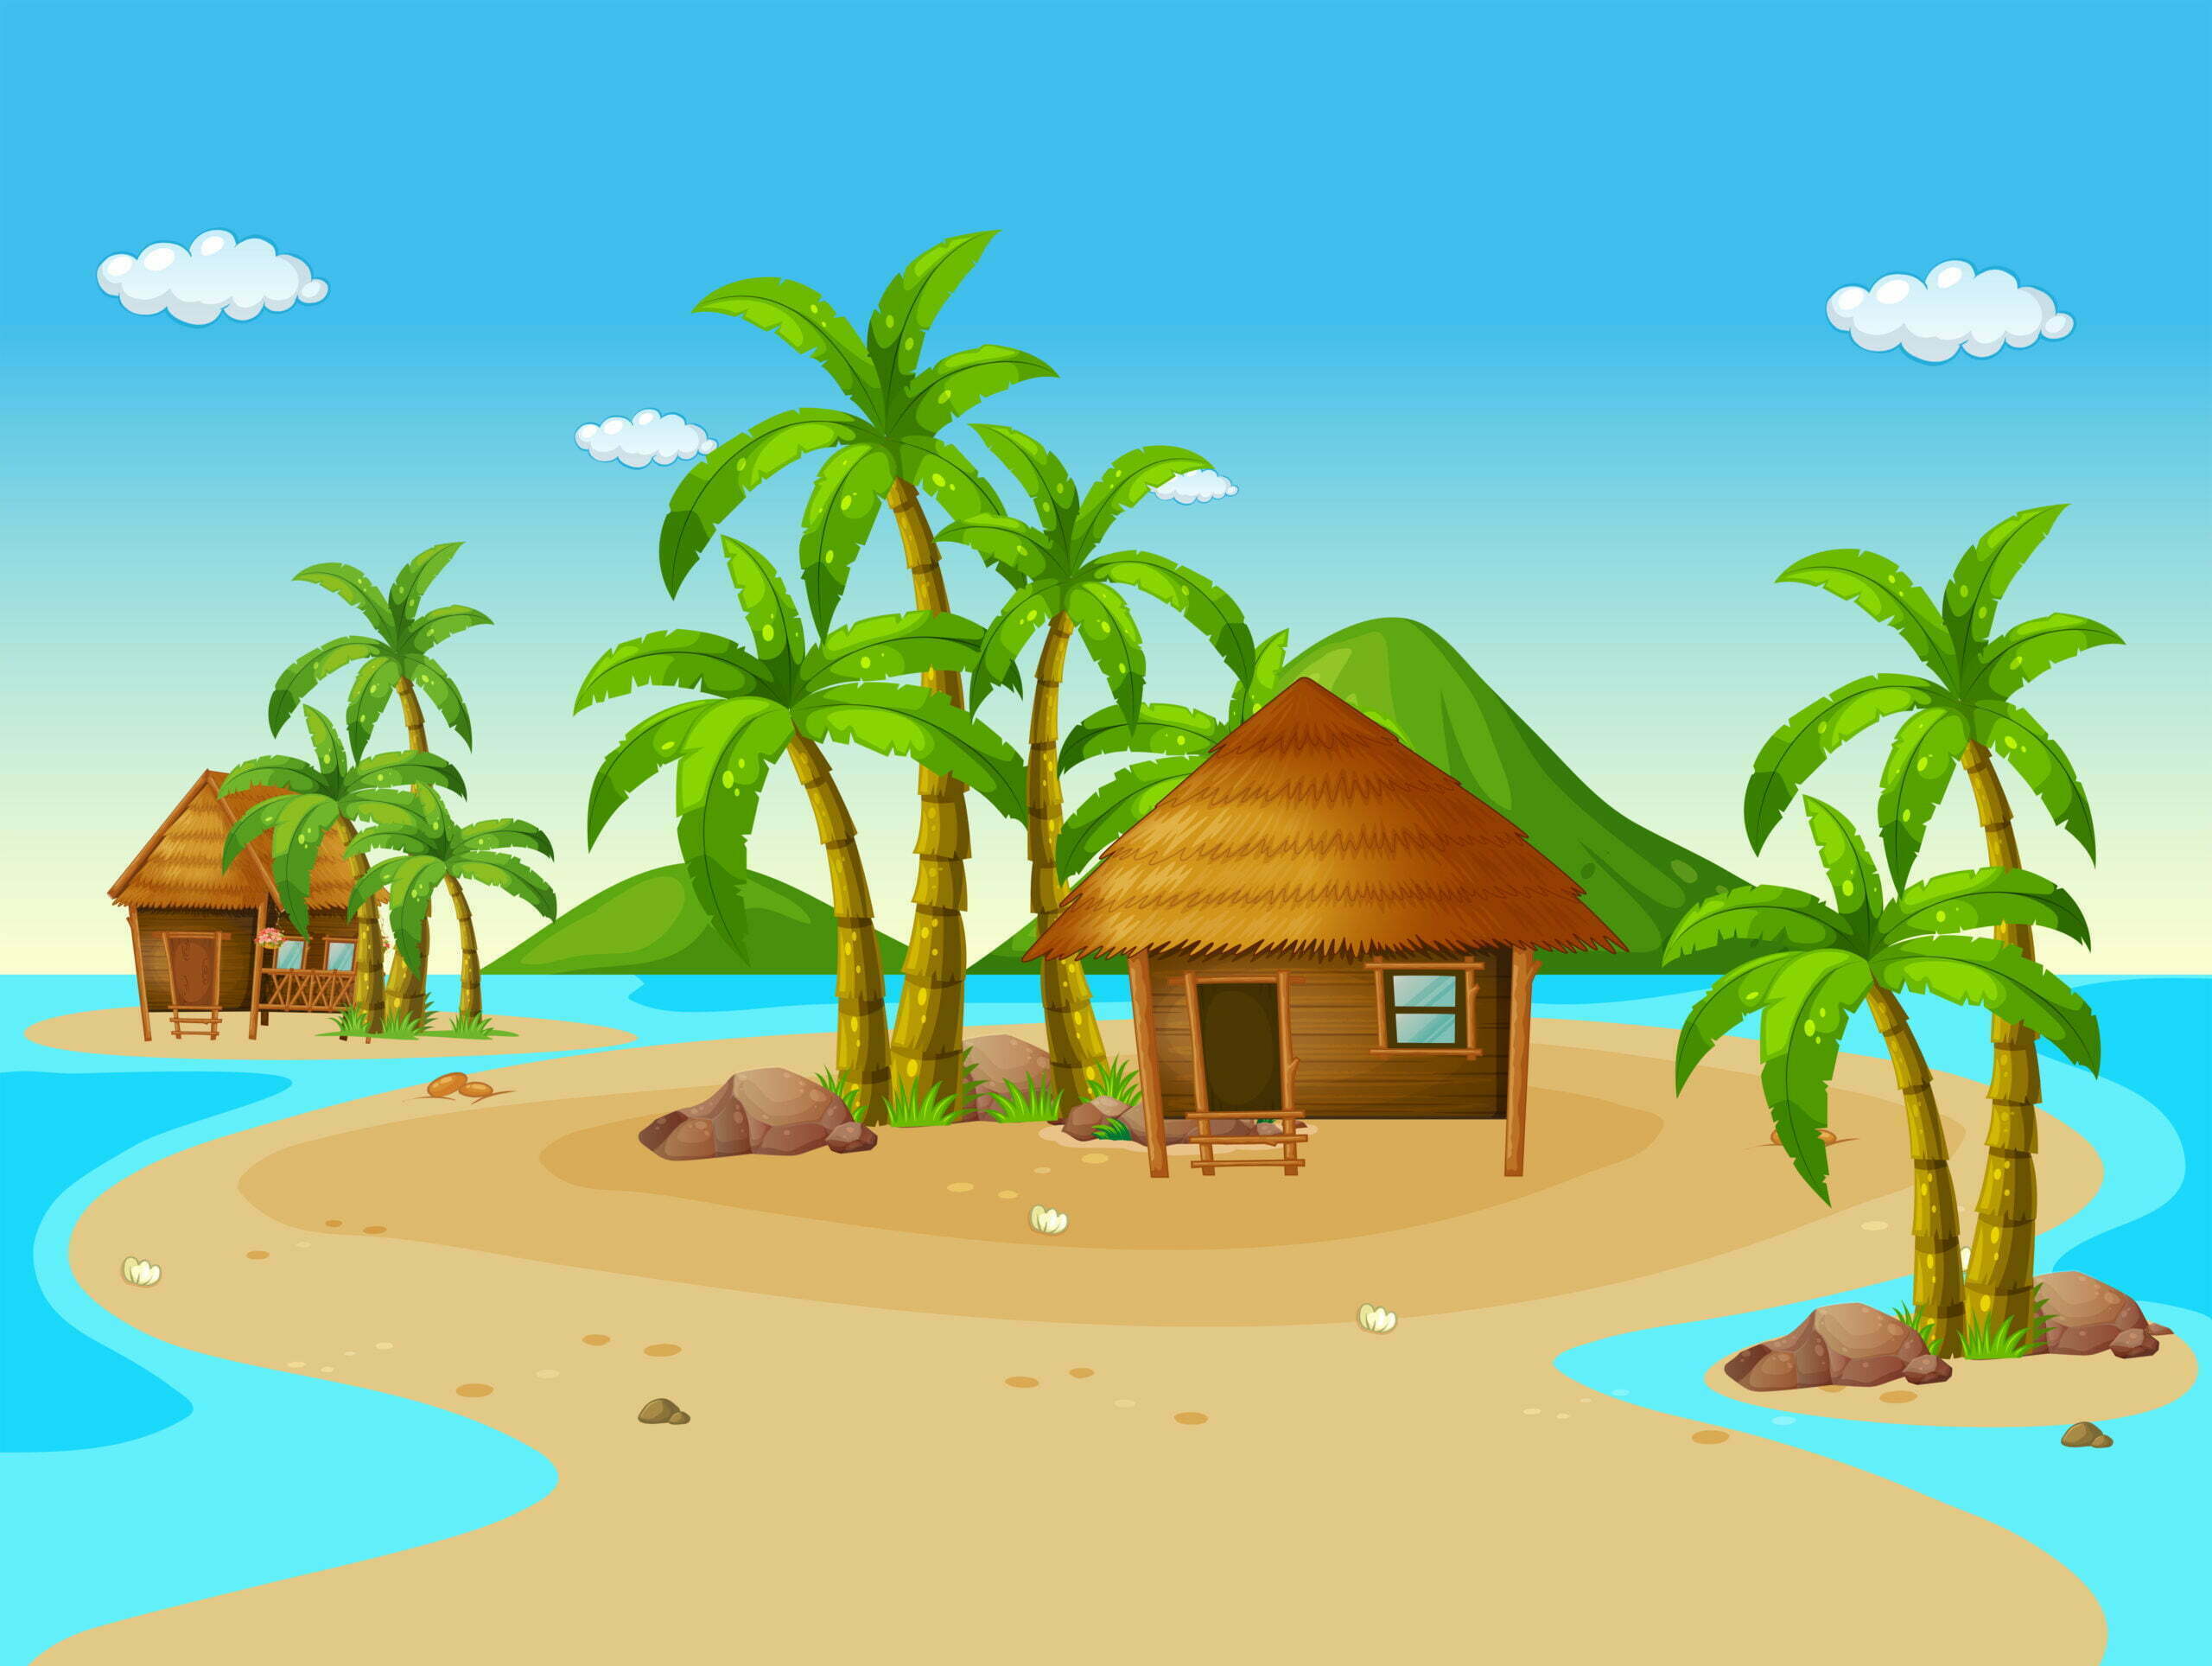 Scene with wooden huts on island